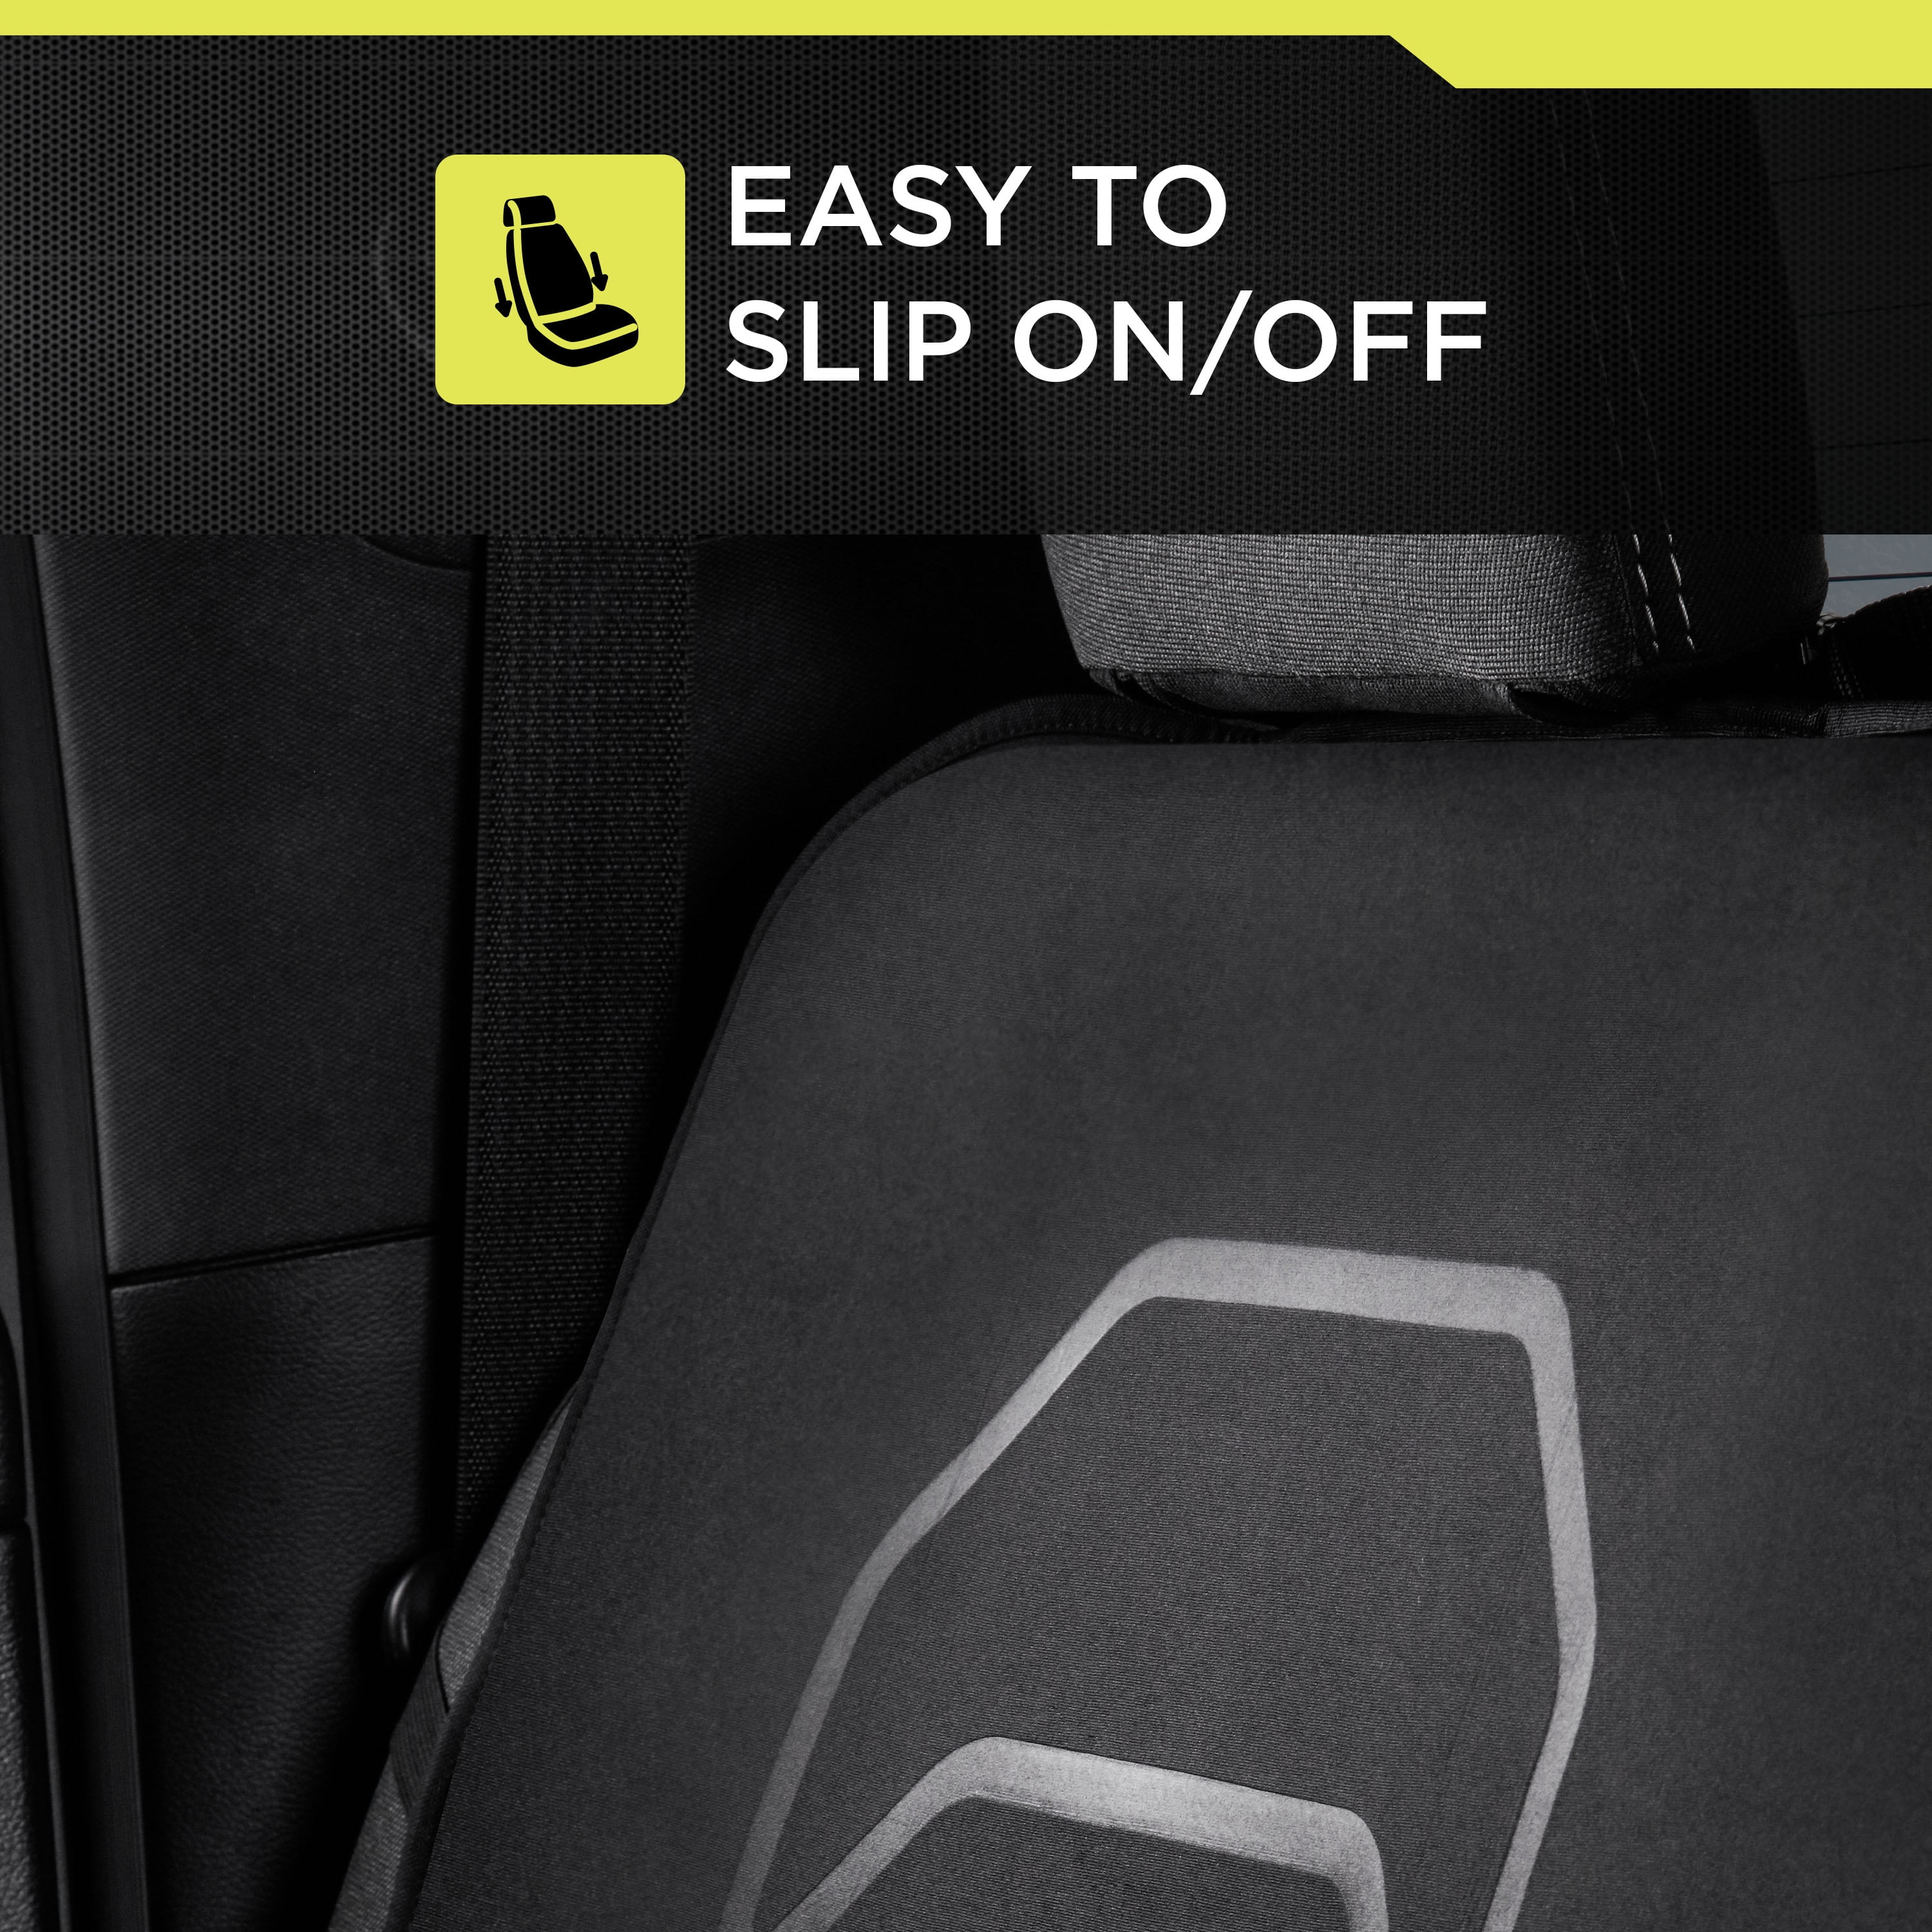 Car Seat Covers for sale in Myrtle Beach, South Carolina